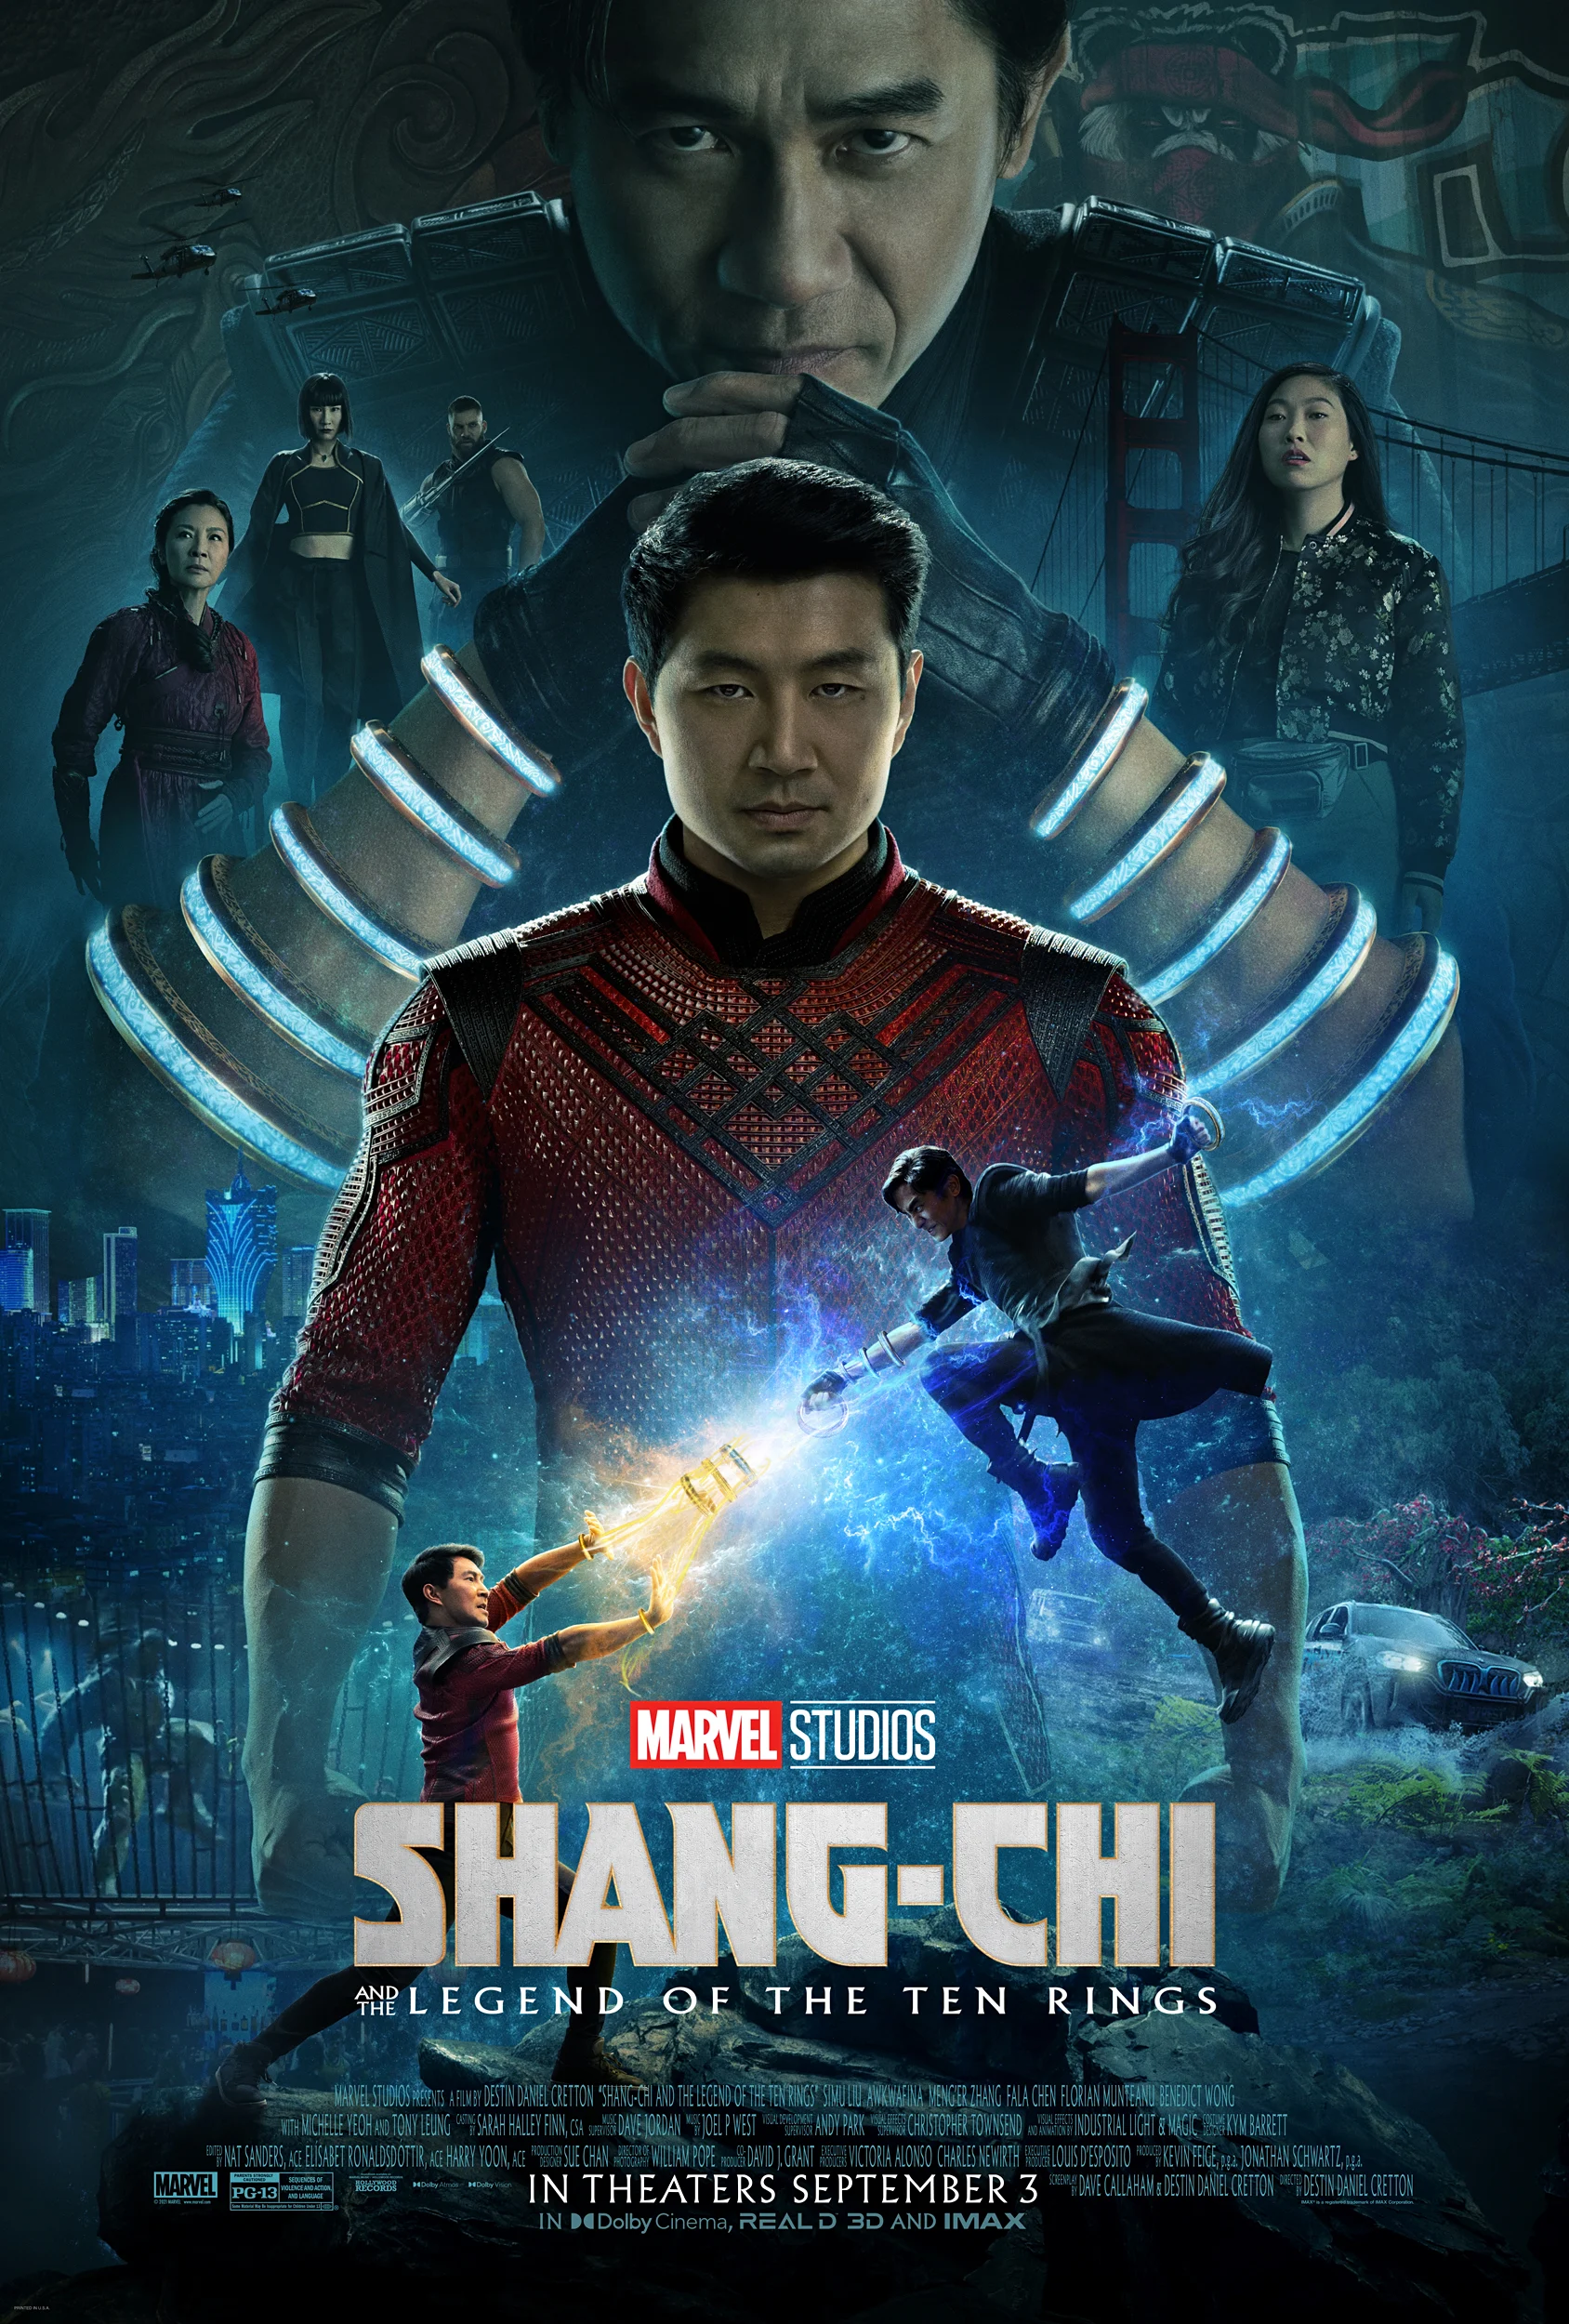 Shang-Chi and the Legend of the Ten Rings (DVD) on MovieShack